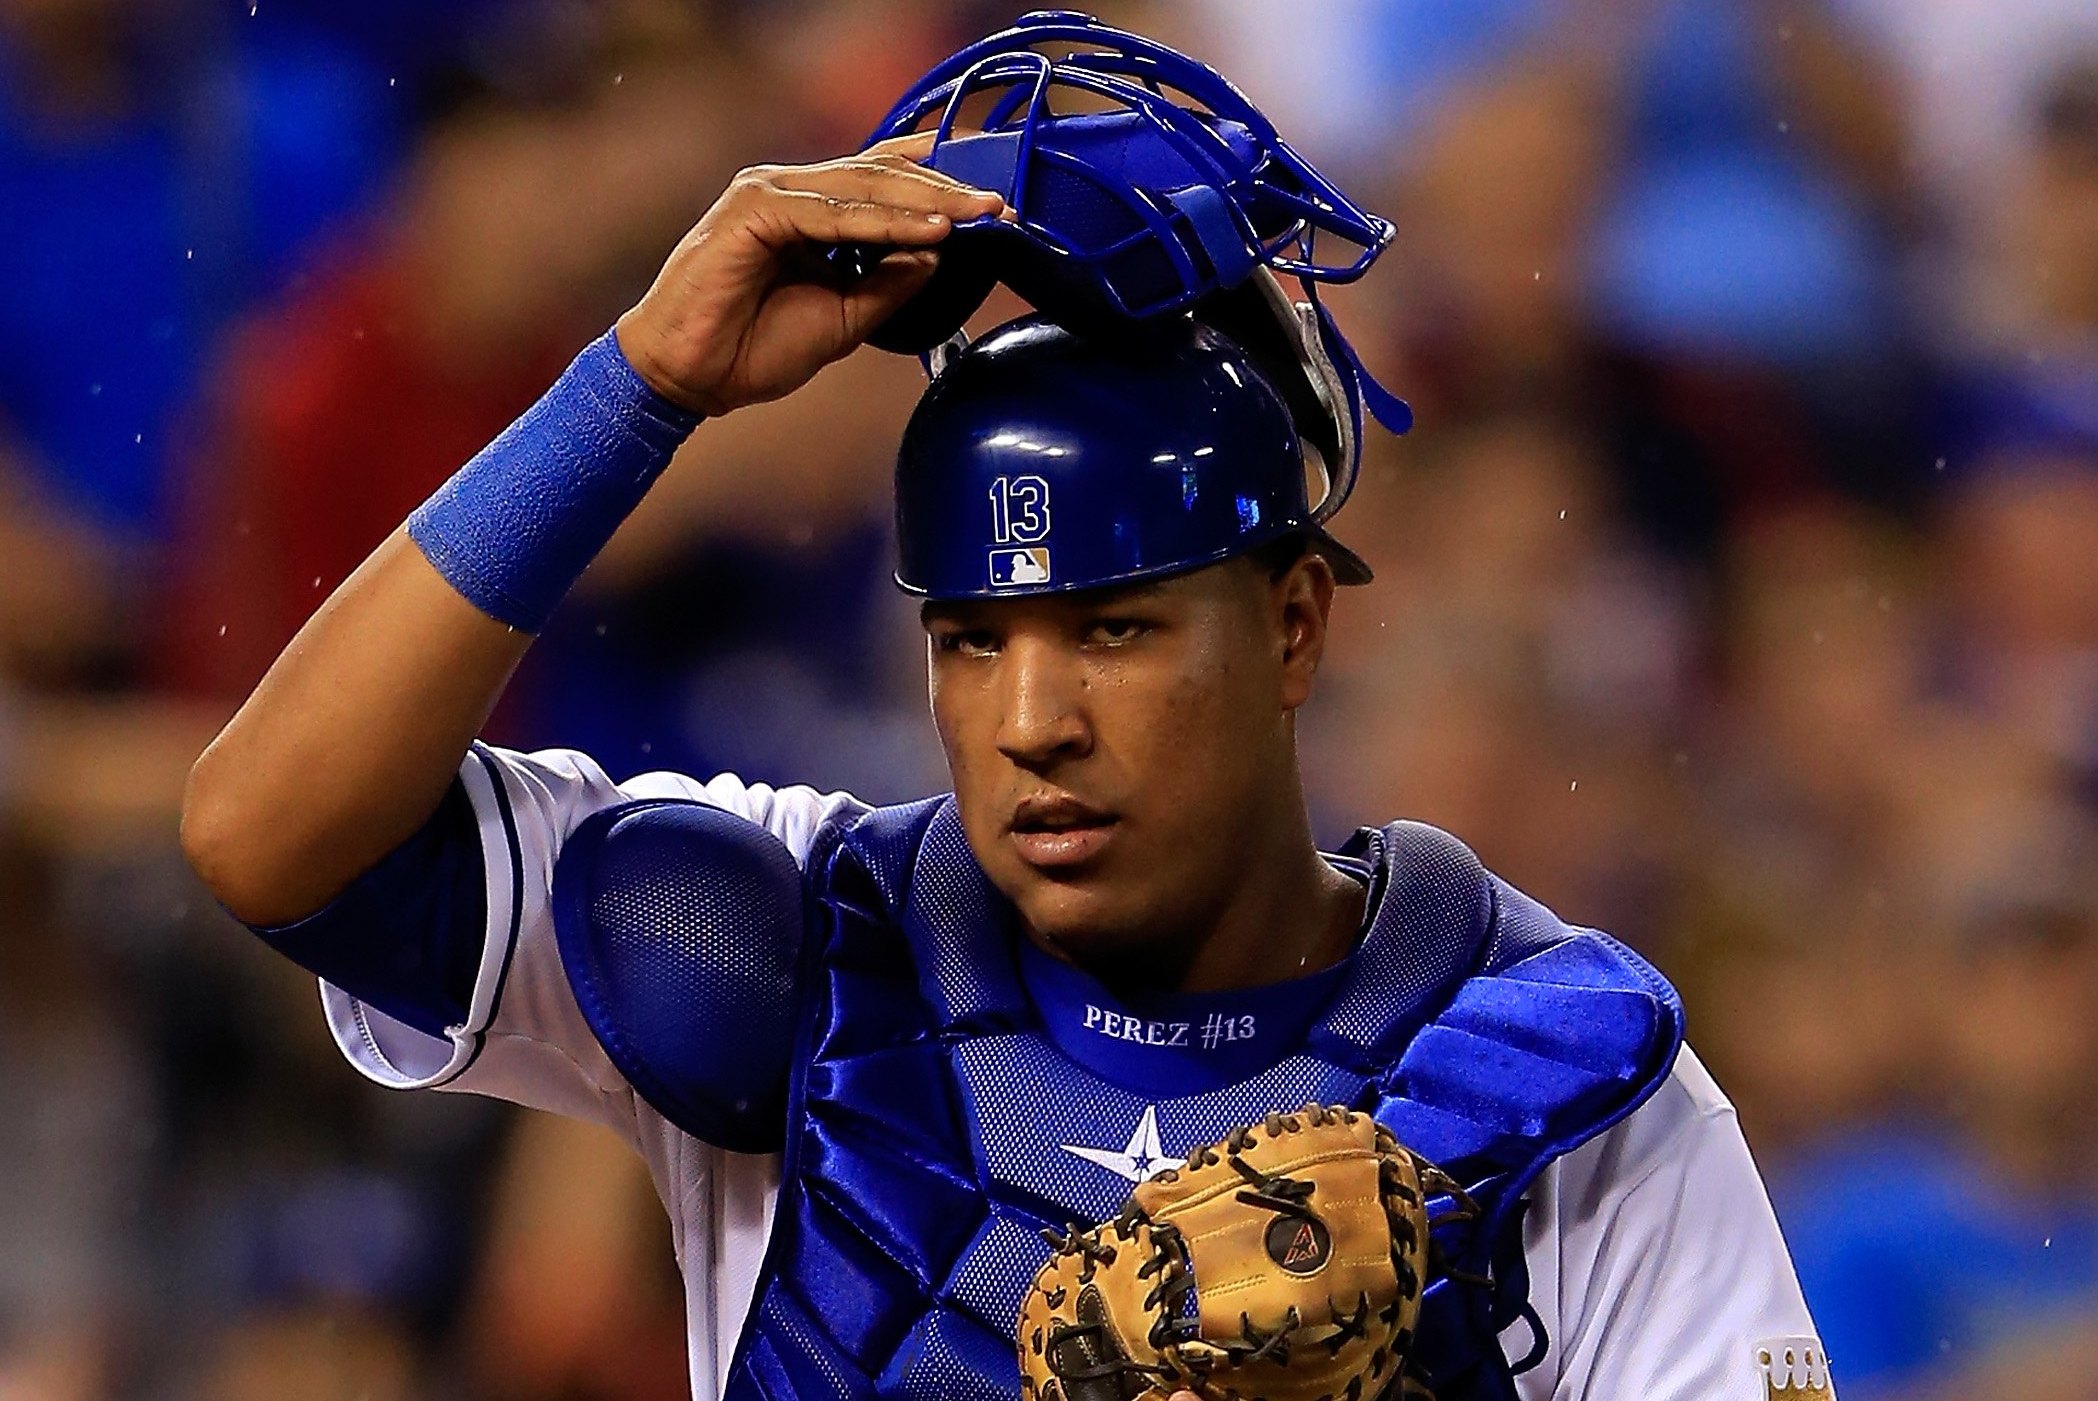 Royals place All-Star catcher Salvador Perez on 7-day concussion